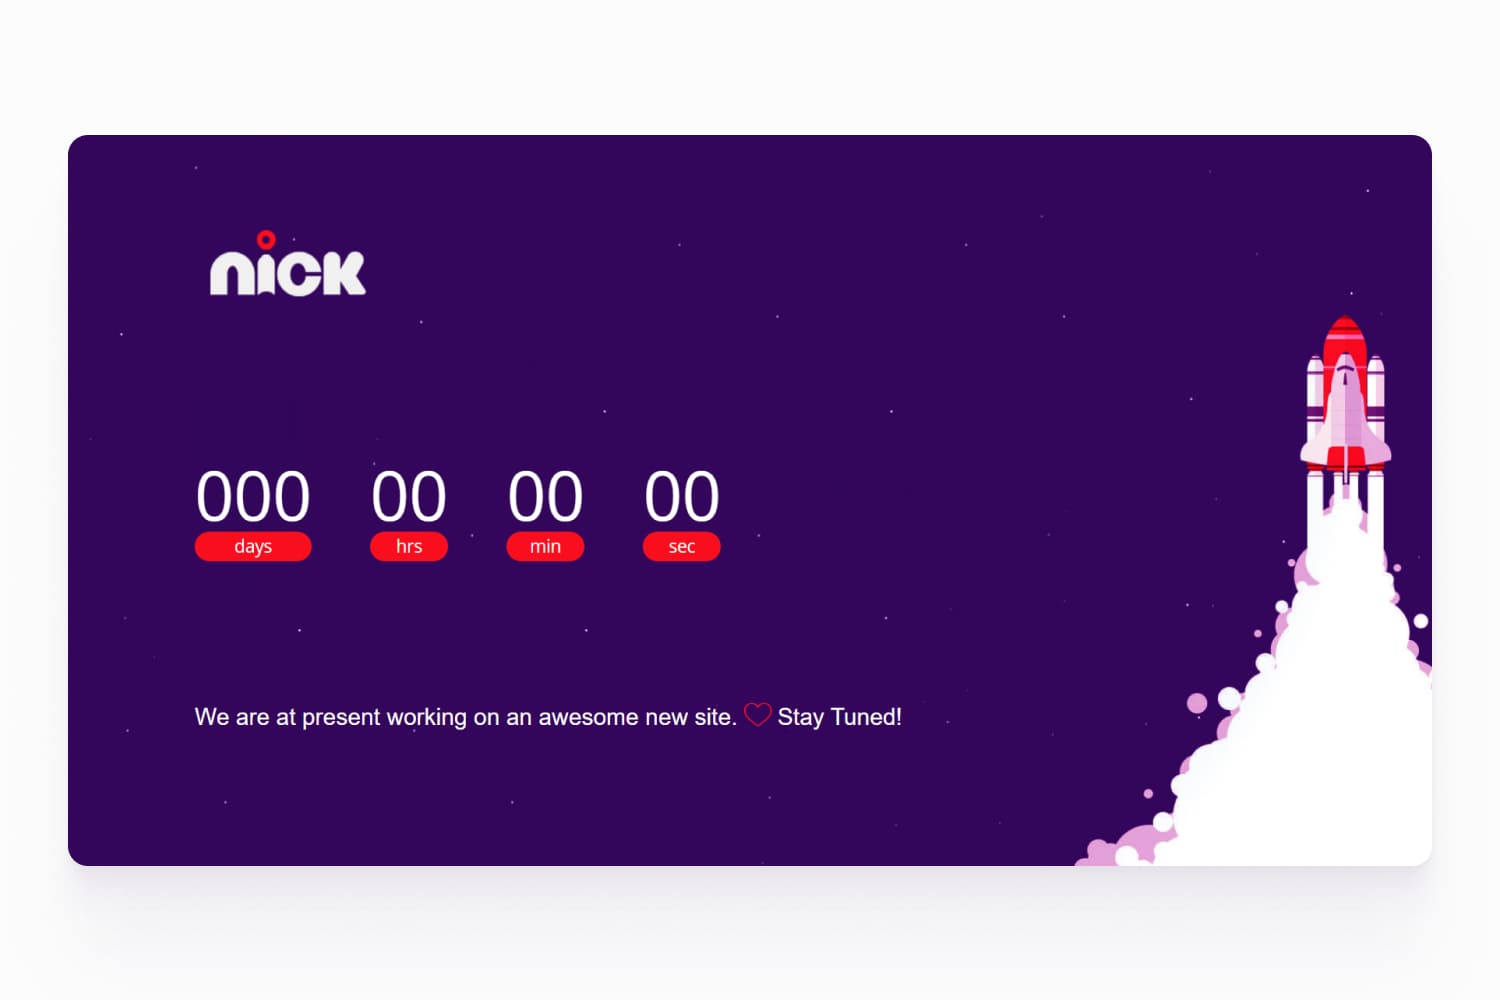 Screenshot of a website page with a countdown to launch and an image of a rocket taking off.